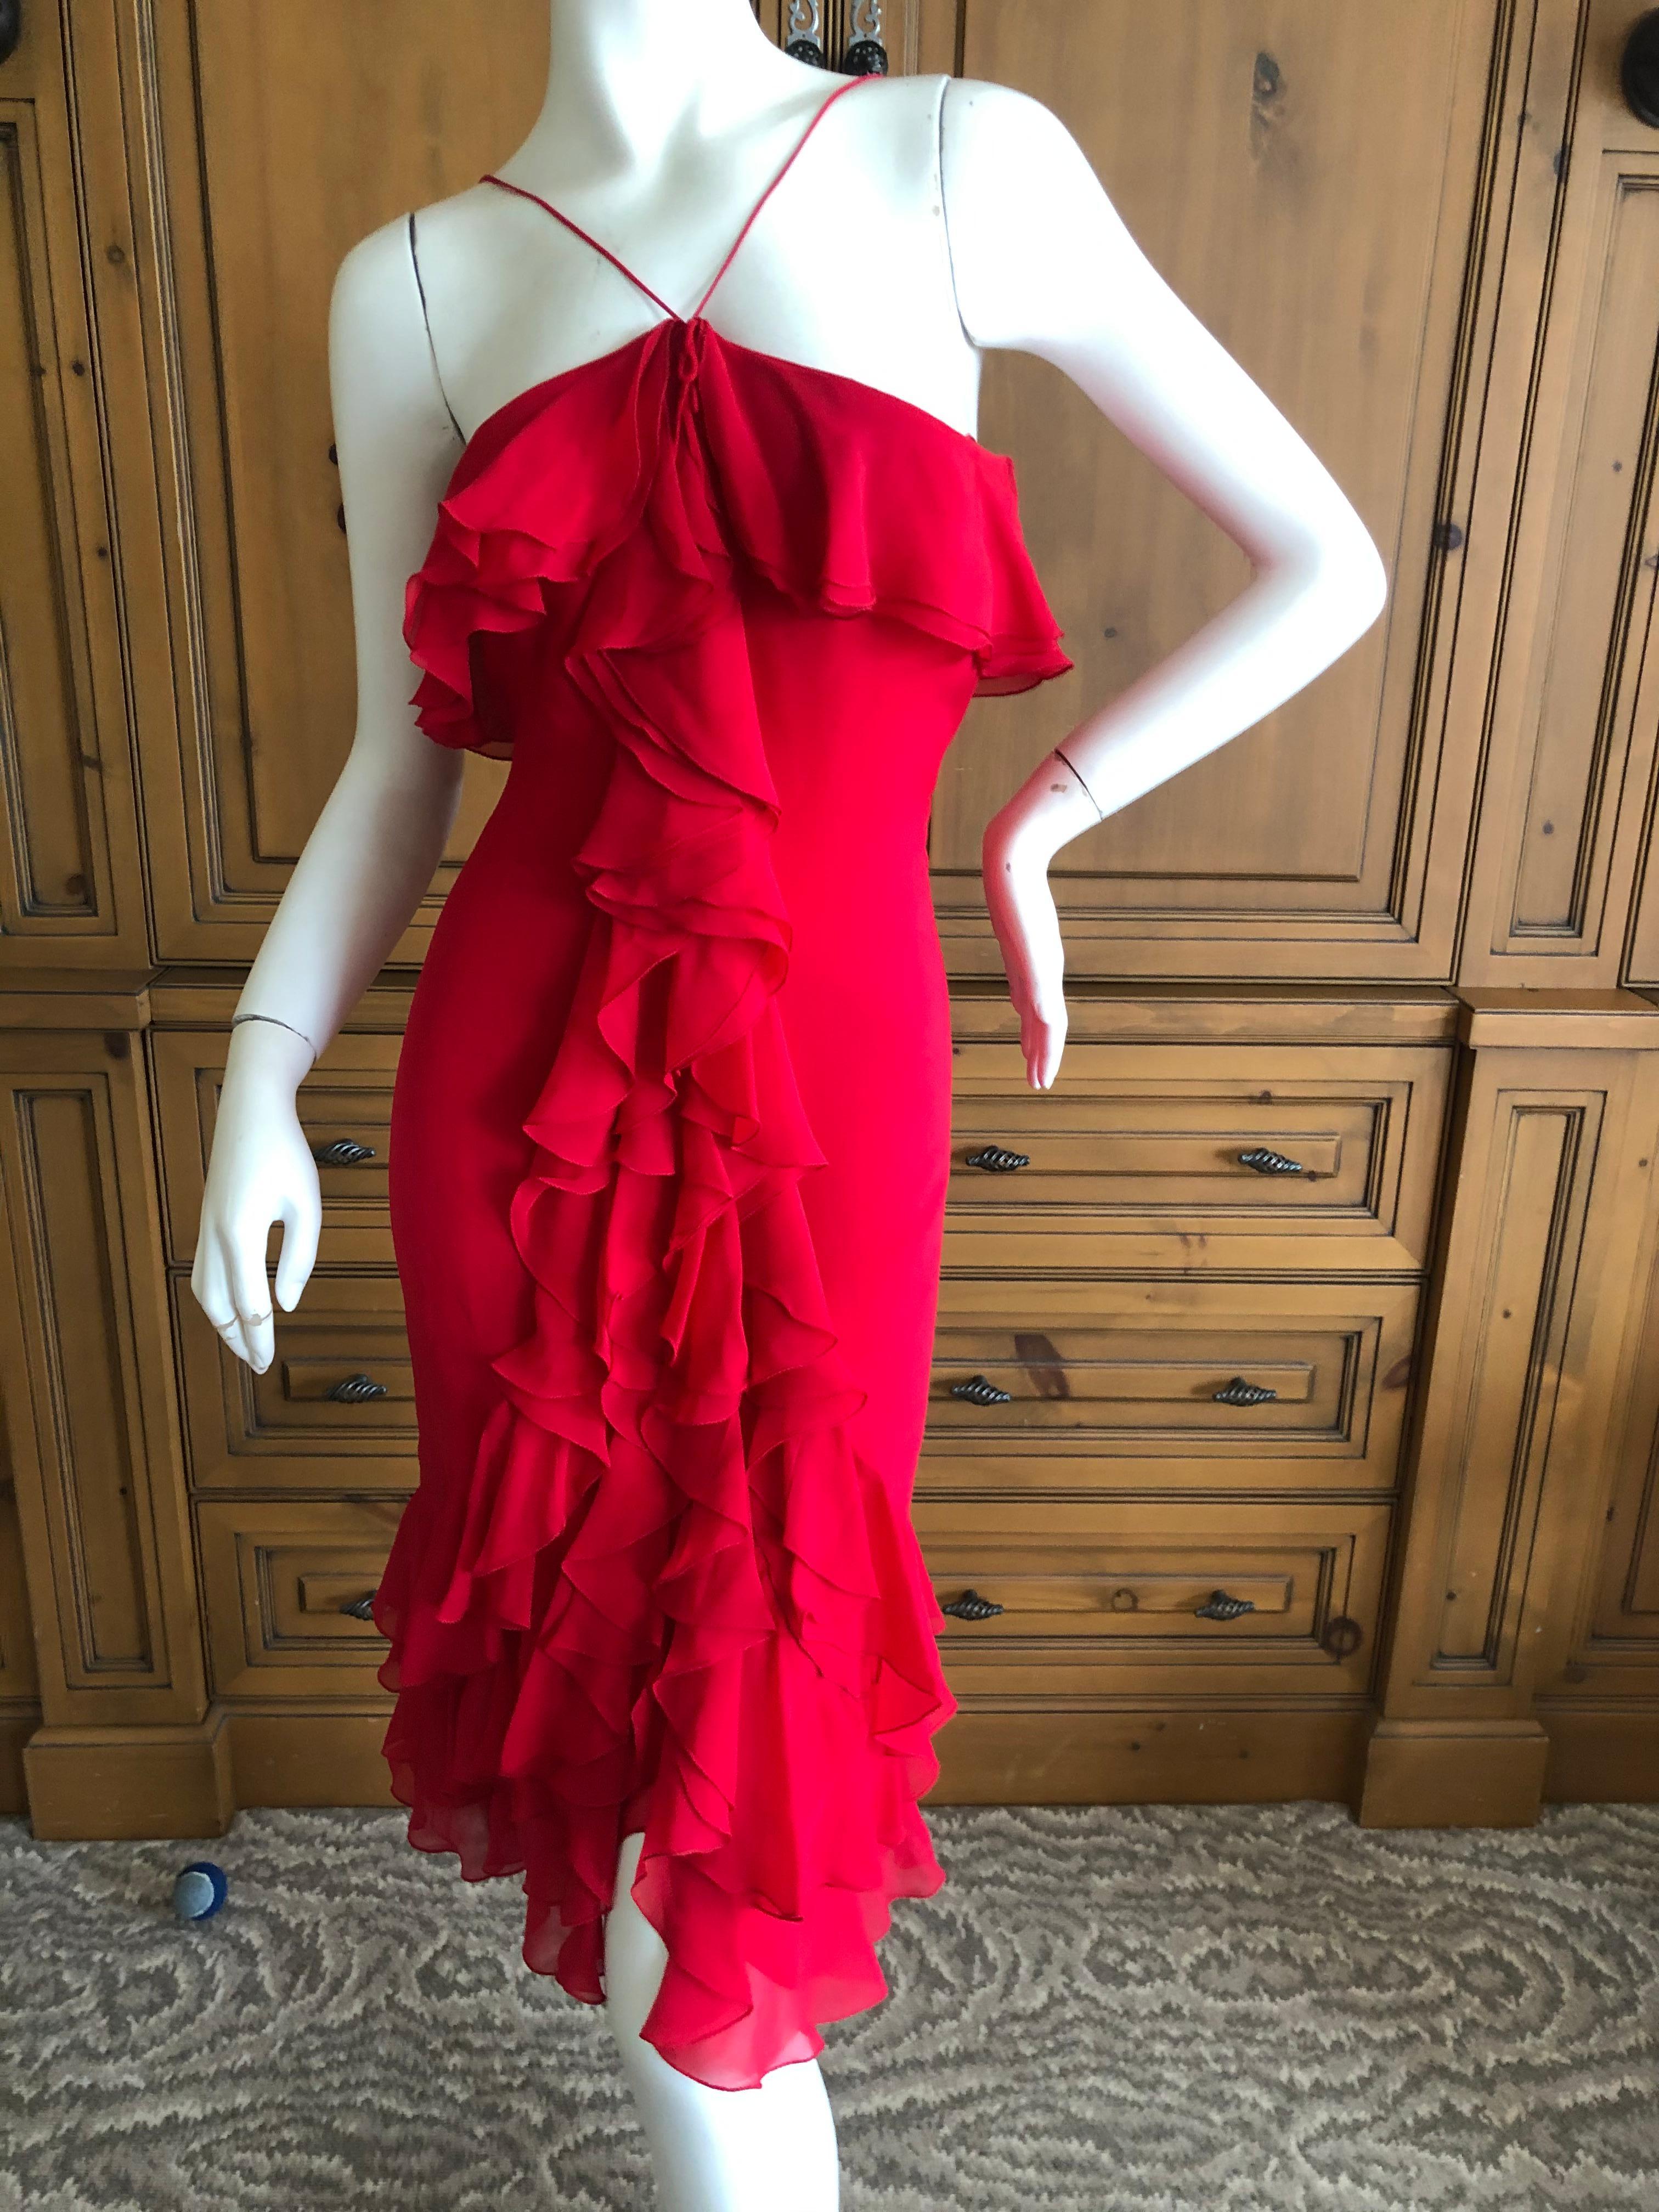 Bill Blass Vintage 1970's Ruffled Red Silk Dress  In Excellent Condition For Sale In Cloverdale, CA